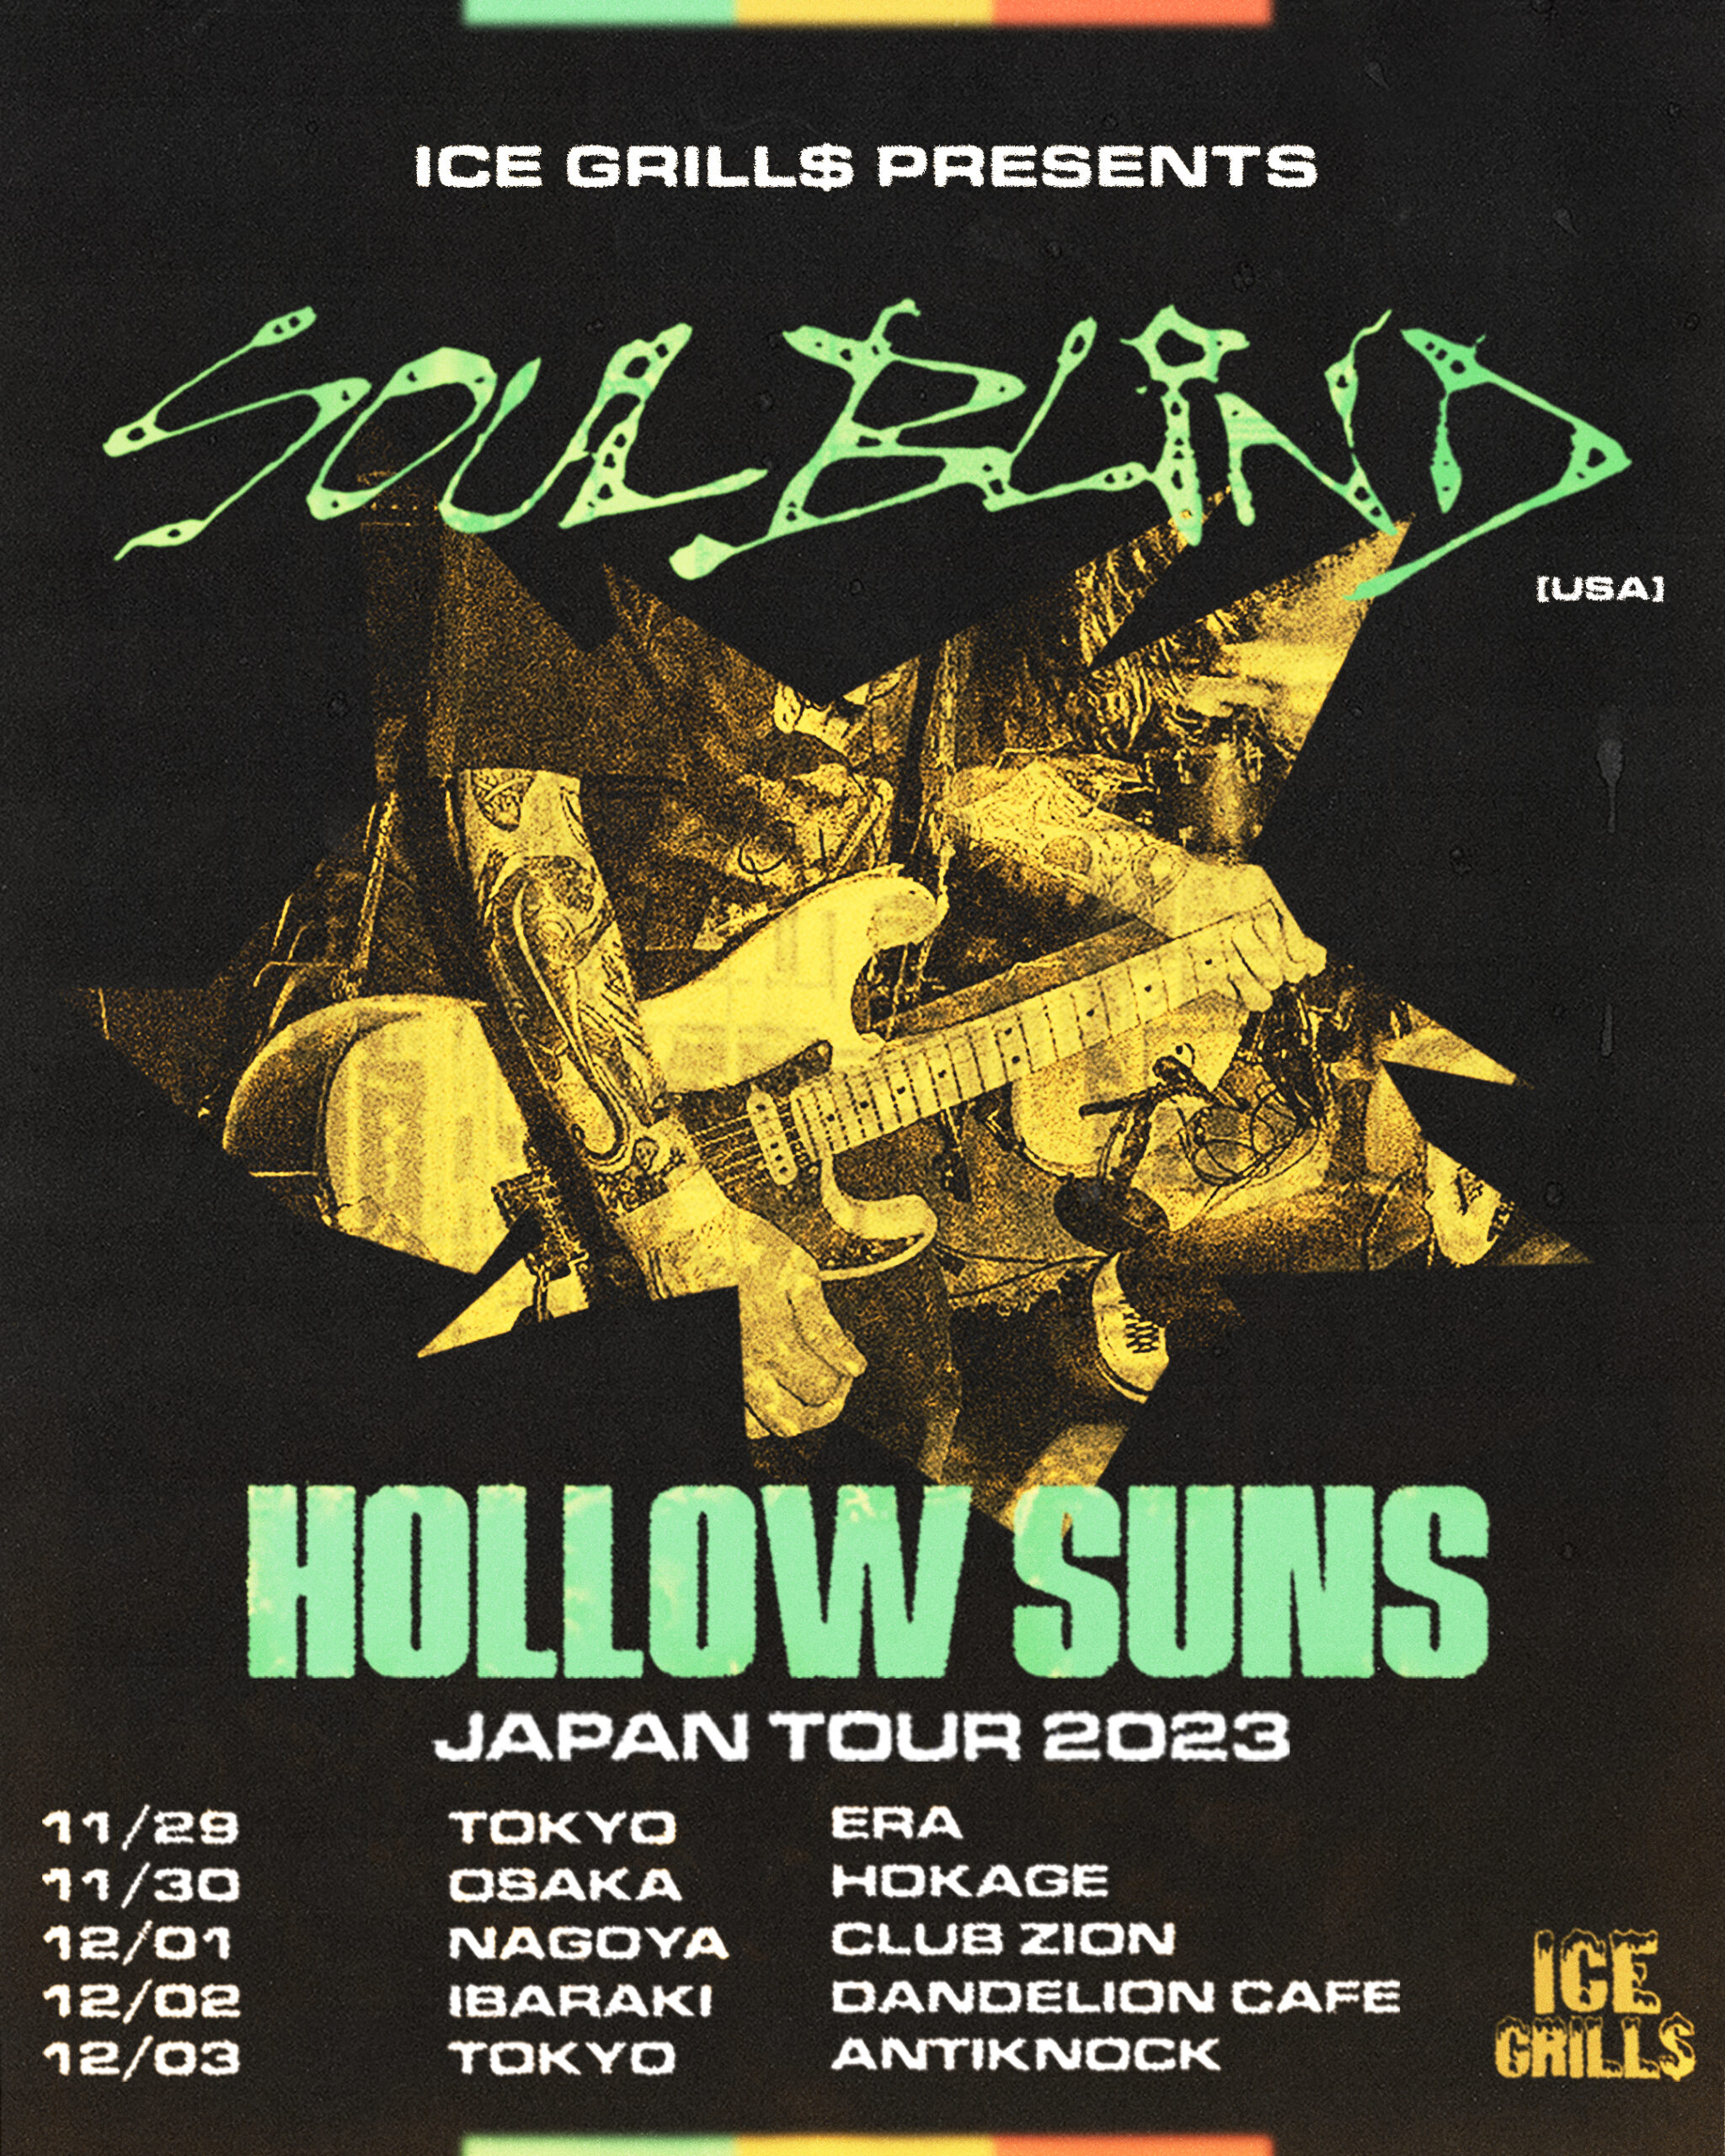 Soul Blind with Hollow Suns Japan Tour 2023 announced!